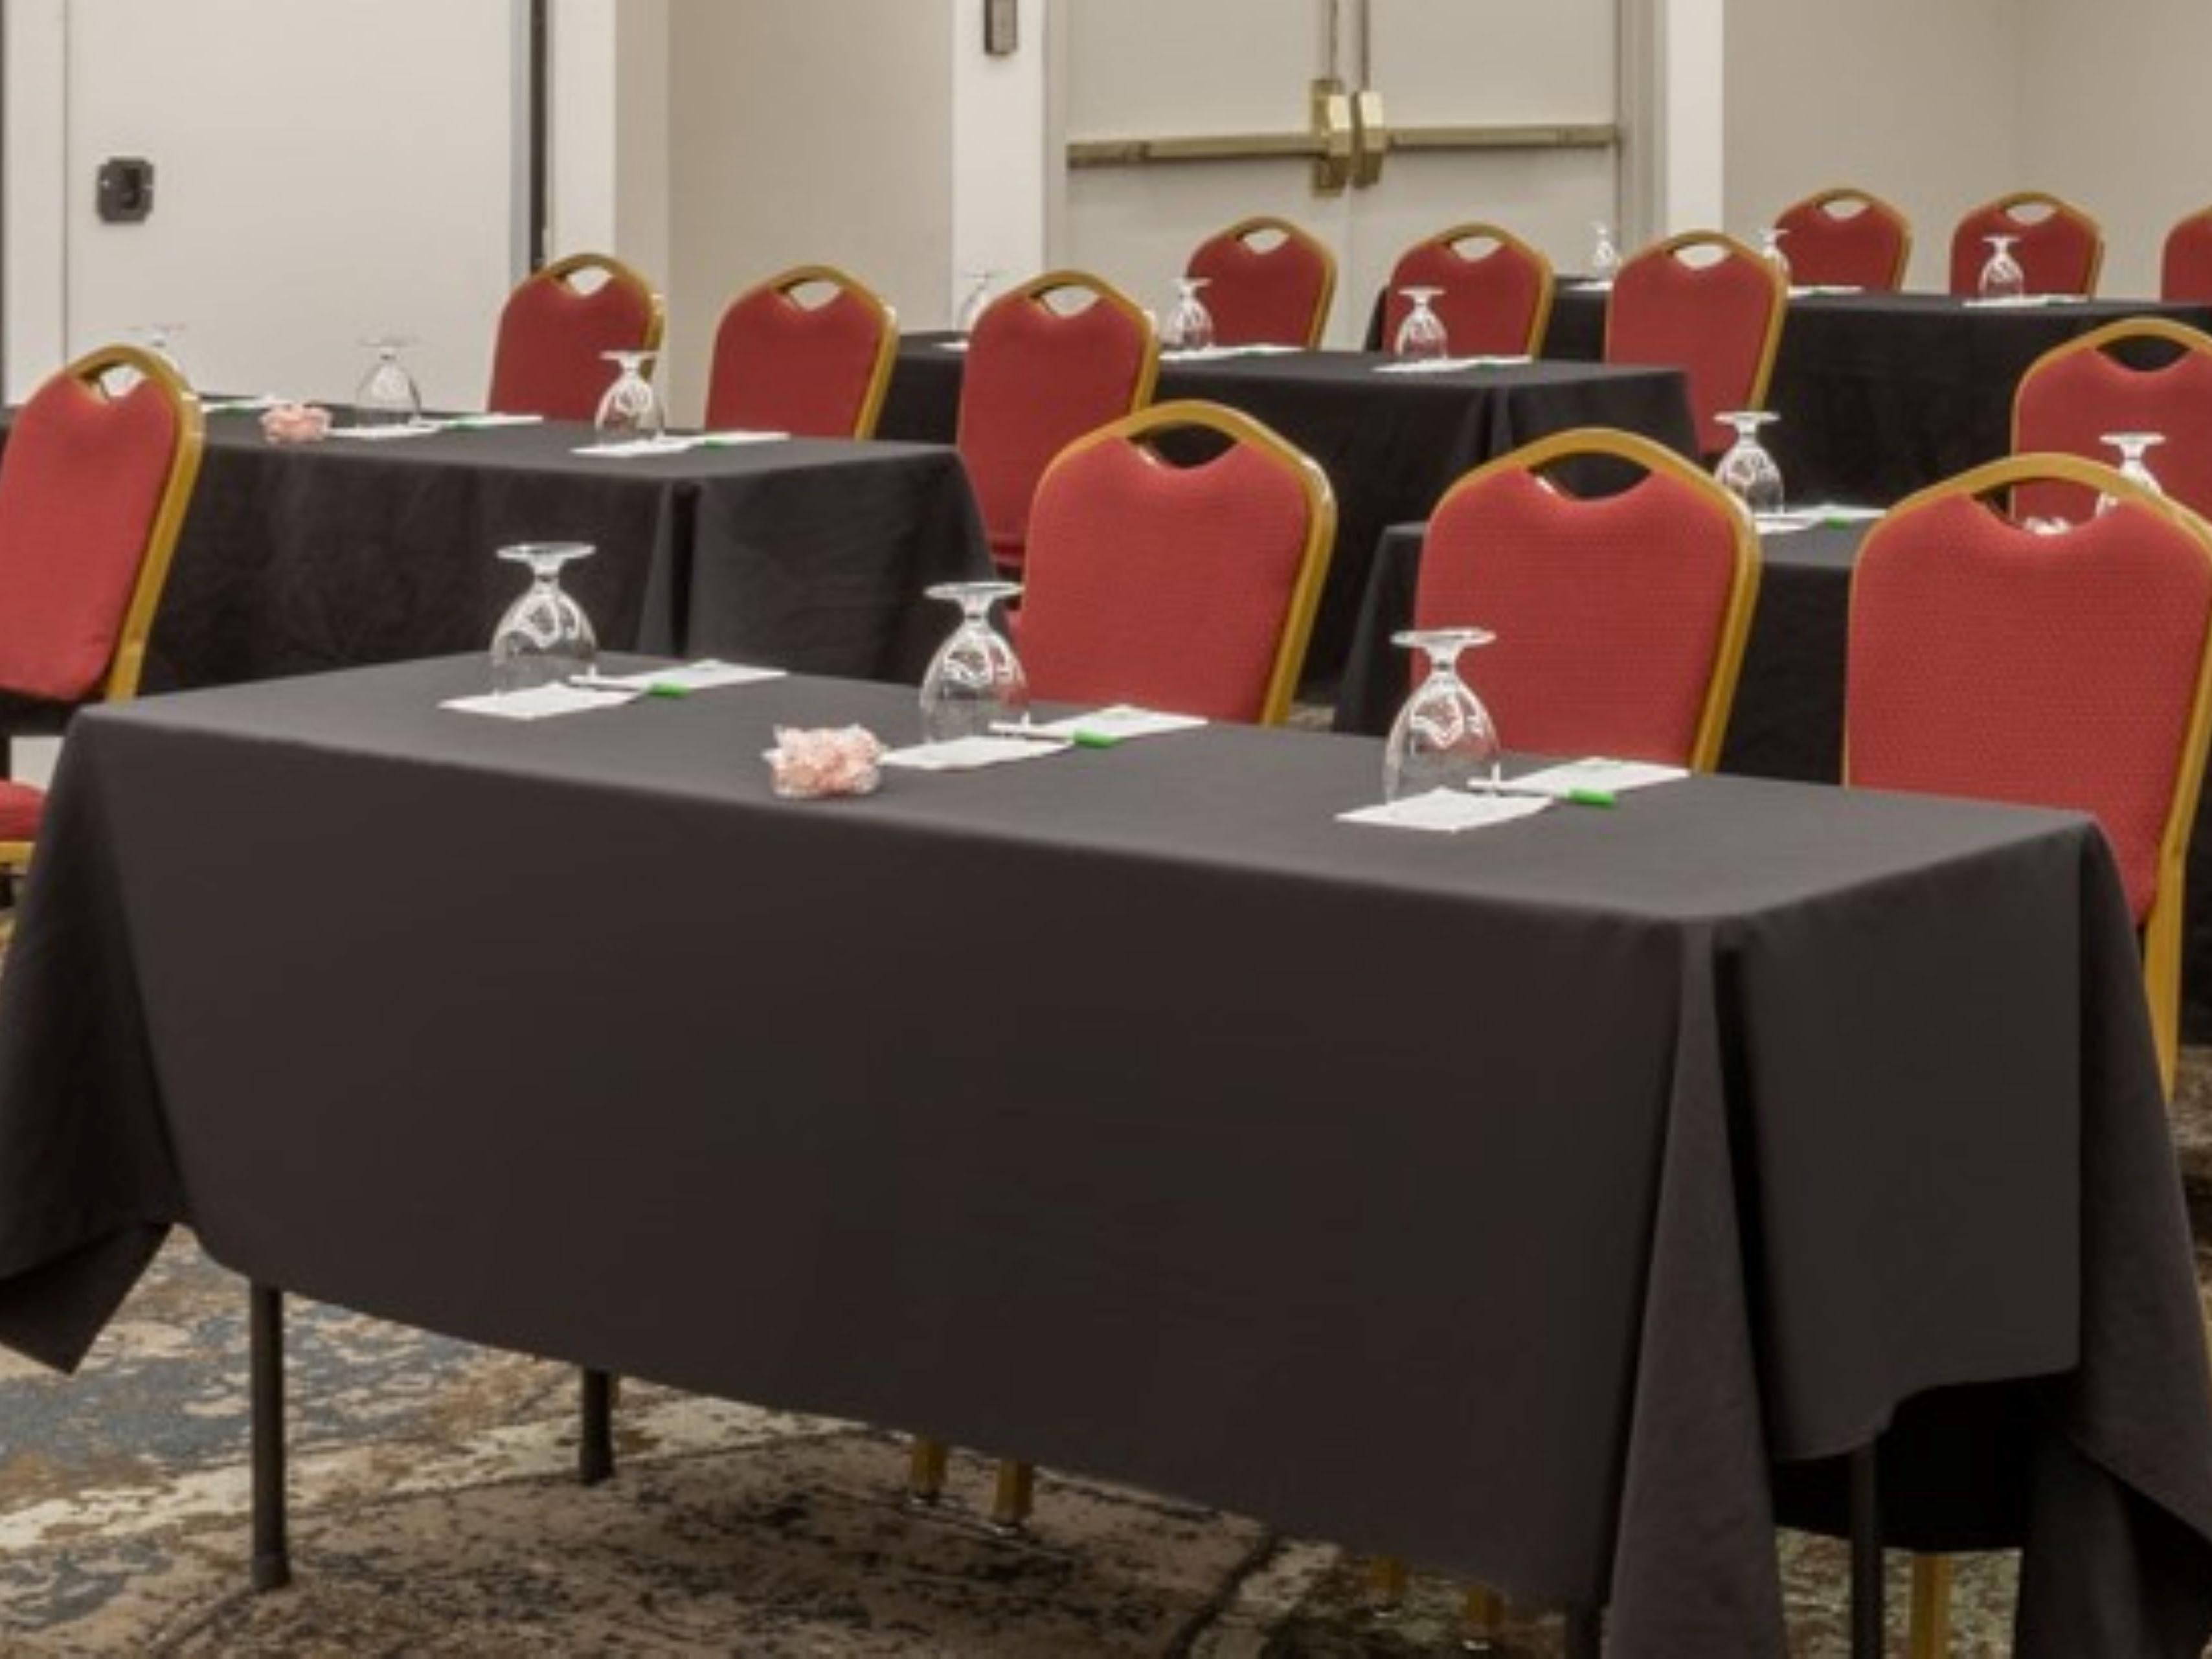 We are delighted to offer a wide variety of options for your next meeting or event. Whether you're a first-timer or an experienced organizer, our well trained sales team can assist you with your meeting/event to ensure it is a success!